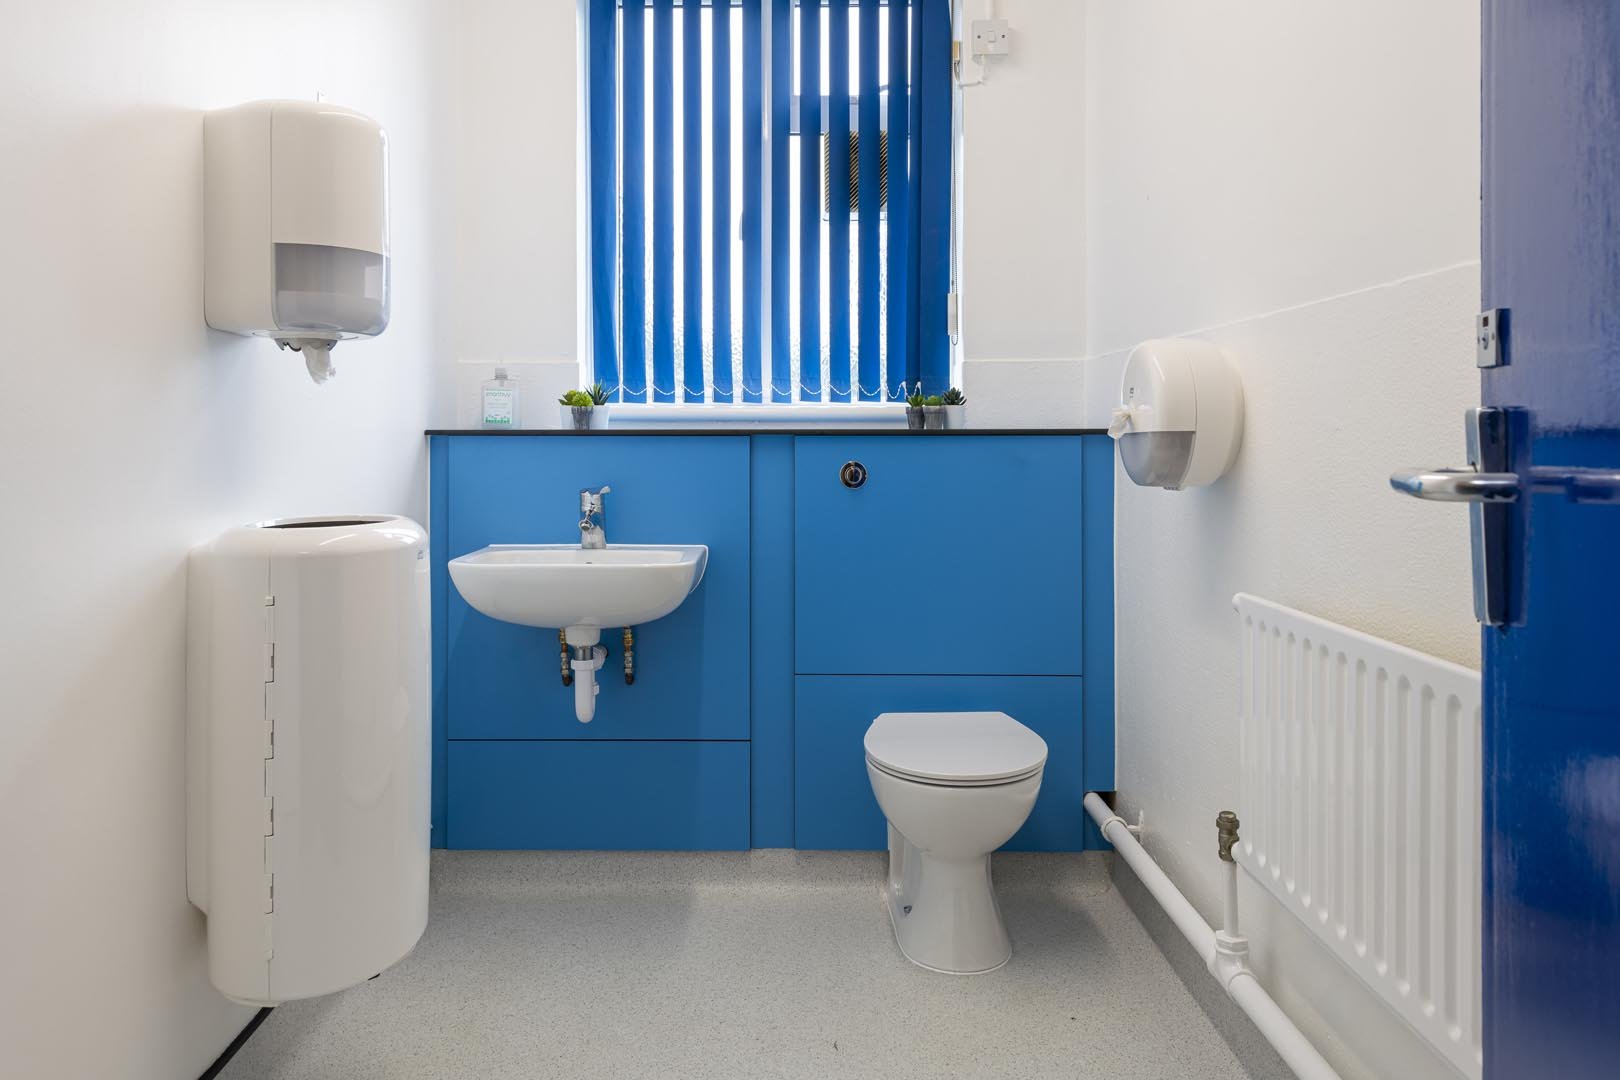 staff toilet and sink at howard junior school with blue low height duct panels and hygienic wall cladding.jpg